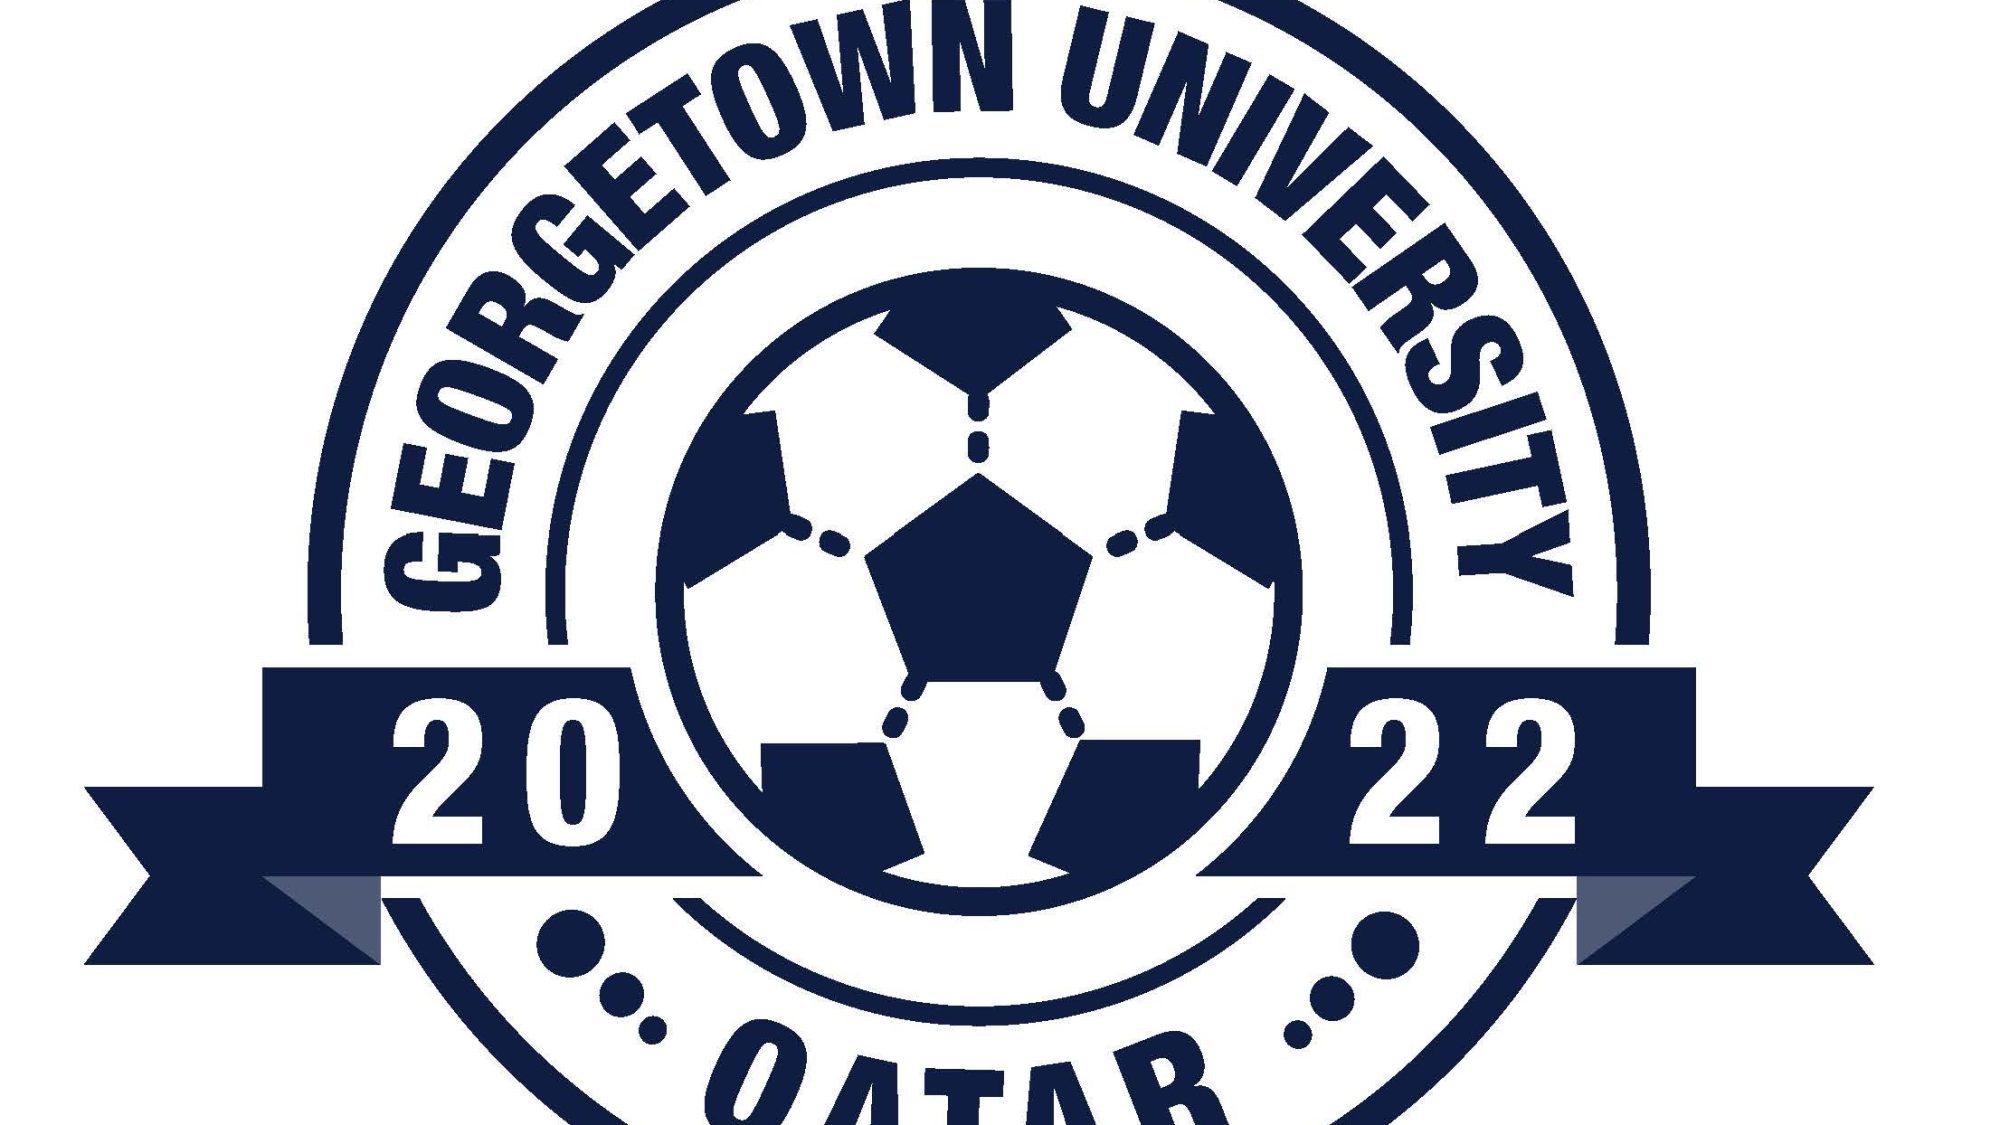 Logo, featuring soccer ball and text, &quot;Georgetown University Qatar 2022.&quot;